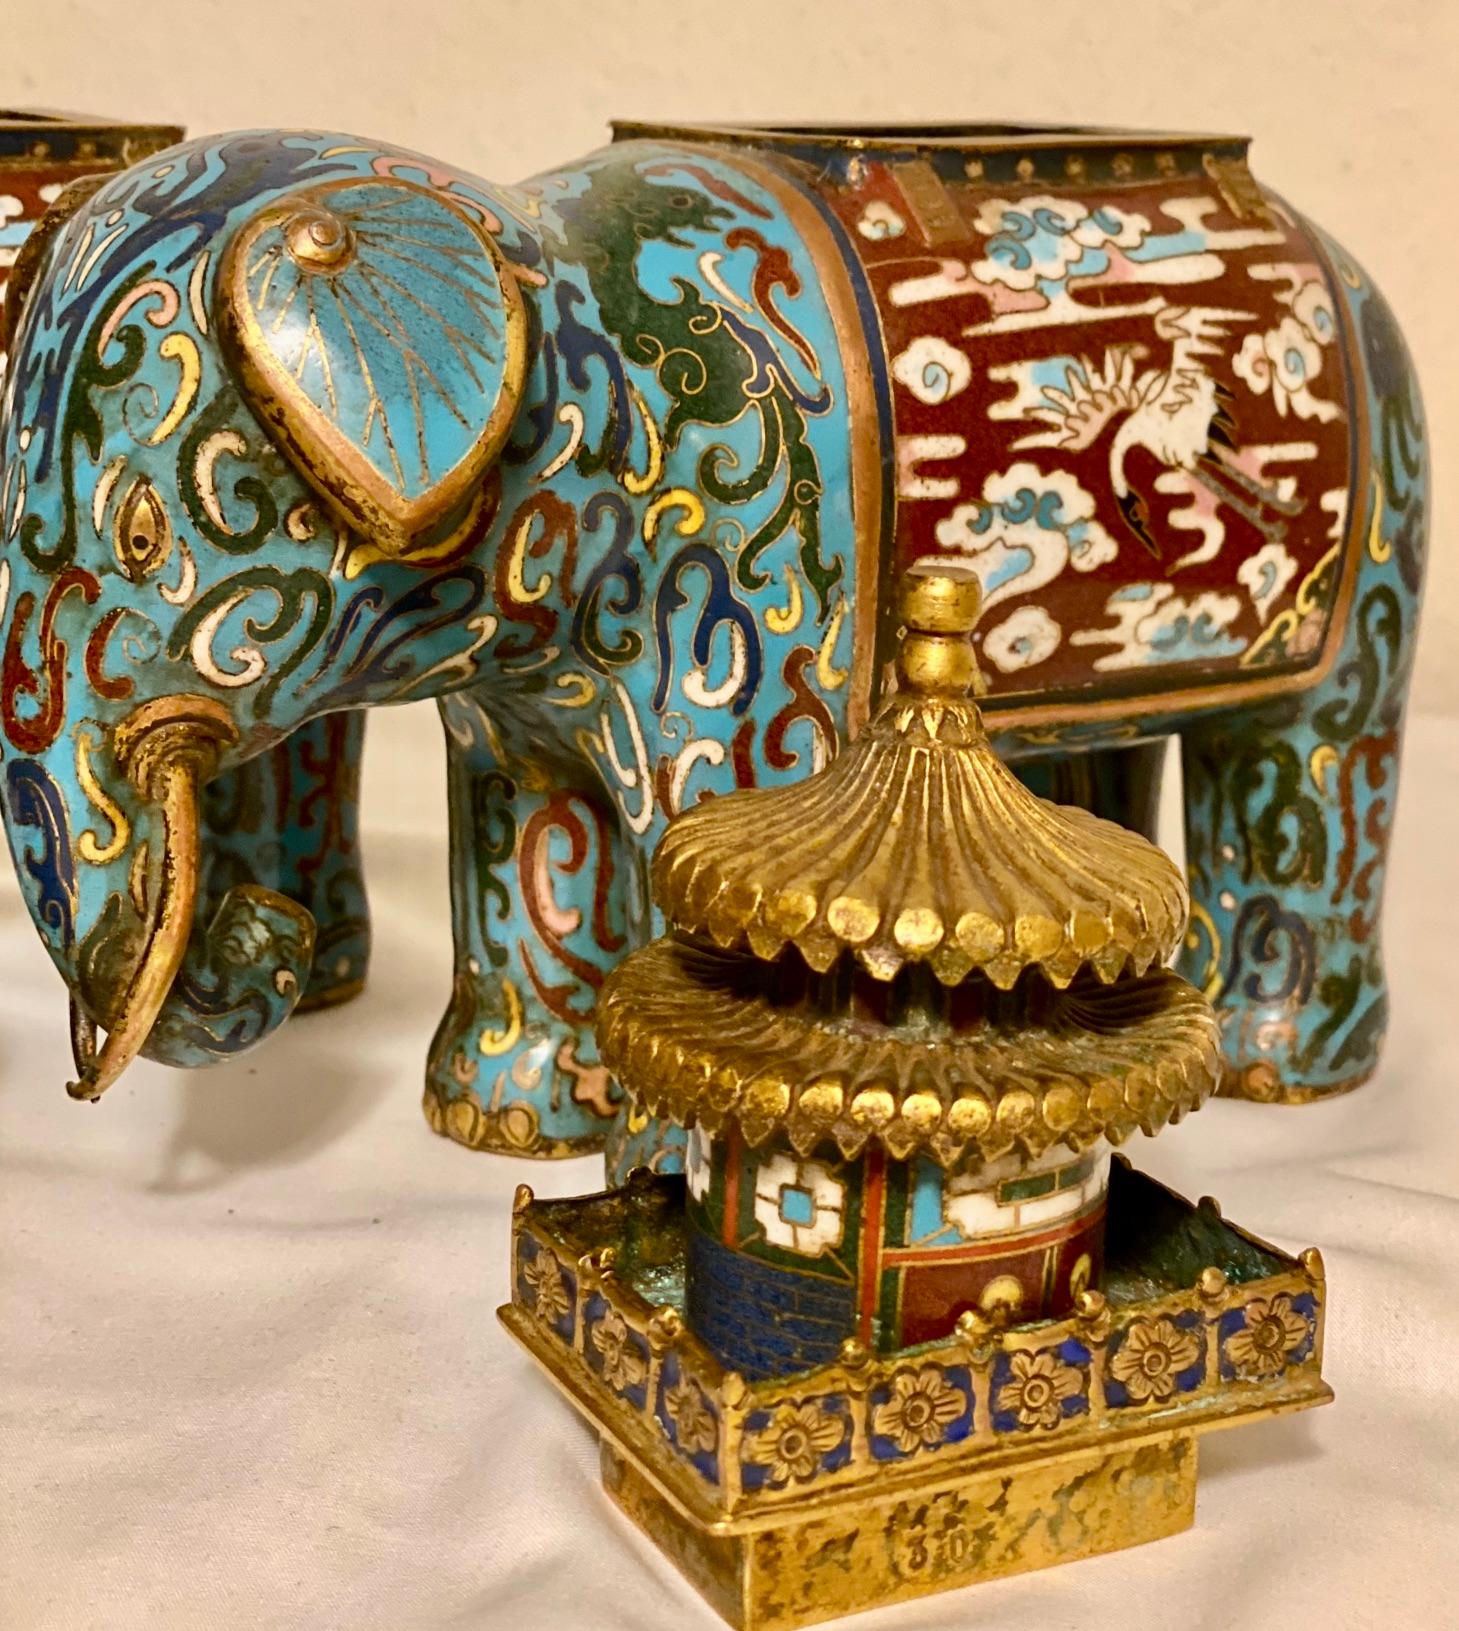 Chinese Pair of Cloisonné Elephant Incense Burners, China, c. 1900